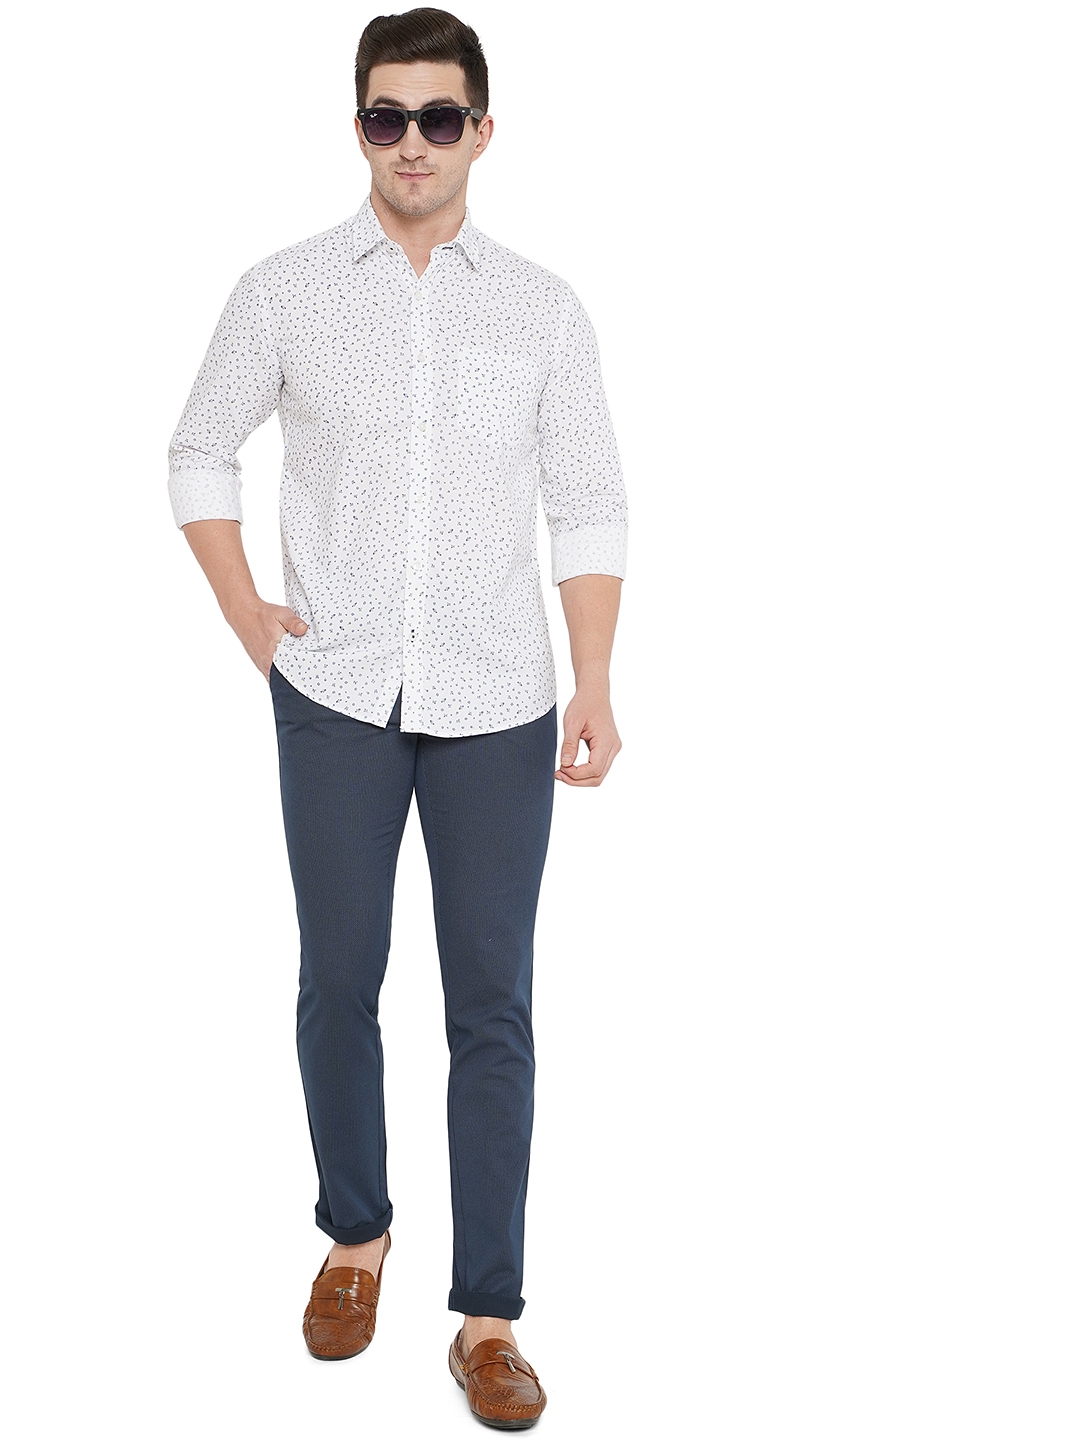 Greenfibre | White Printed Smart Fit Casual Shirt | Greenfibre 3